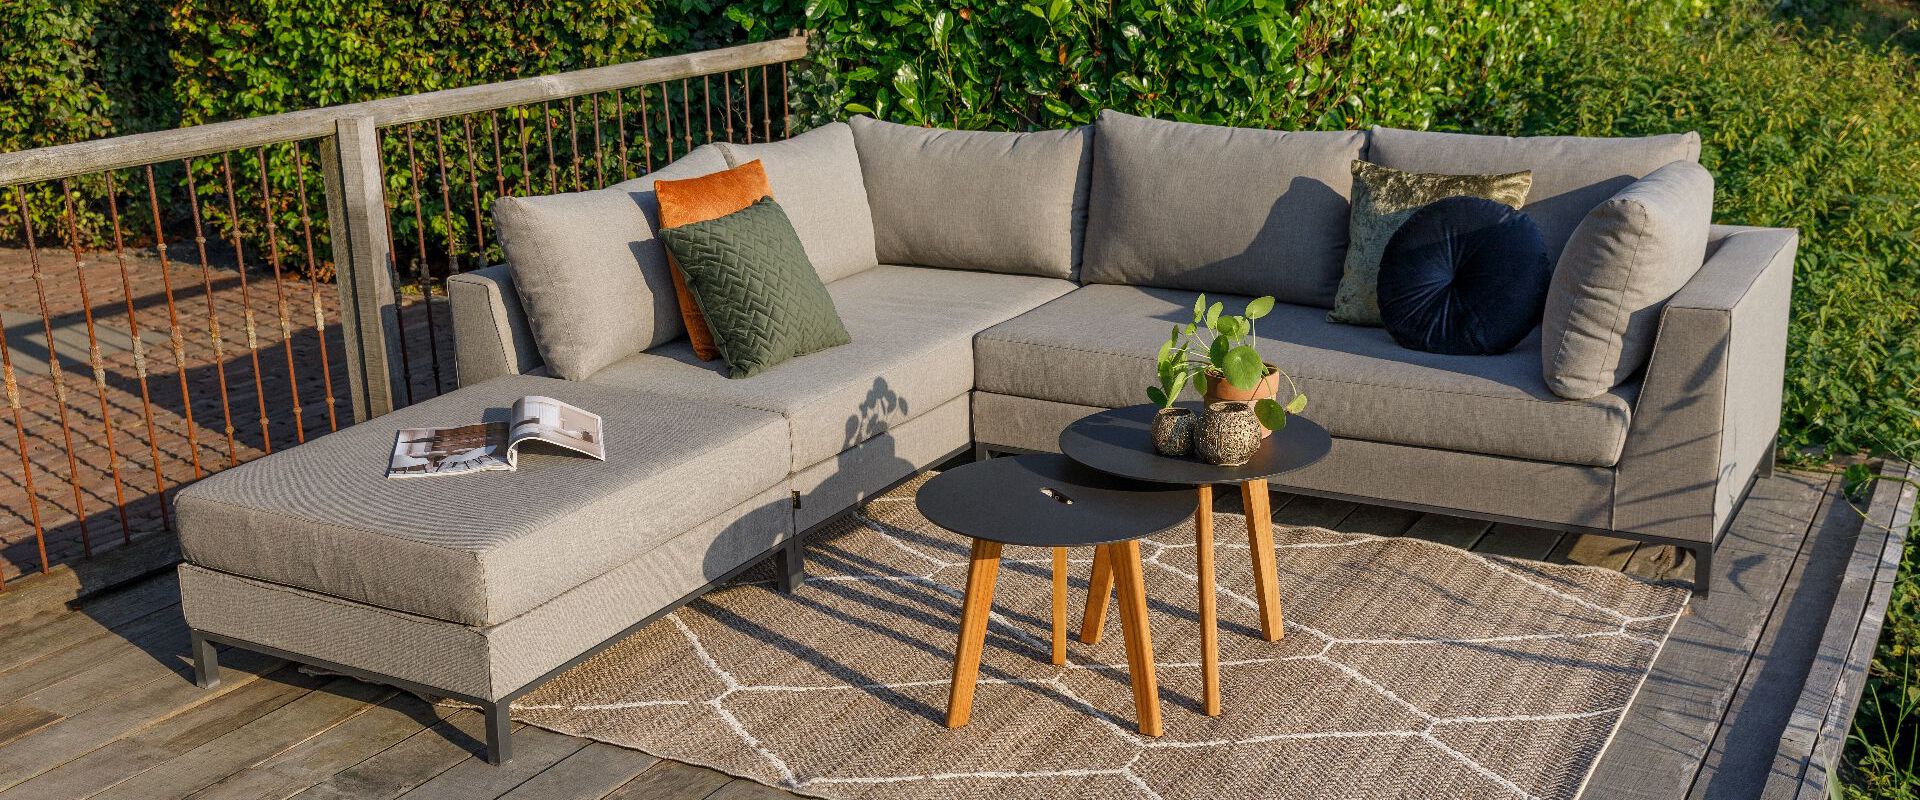 Loungeset Sicilie bei House & Living